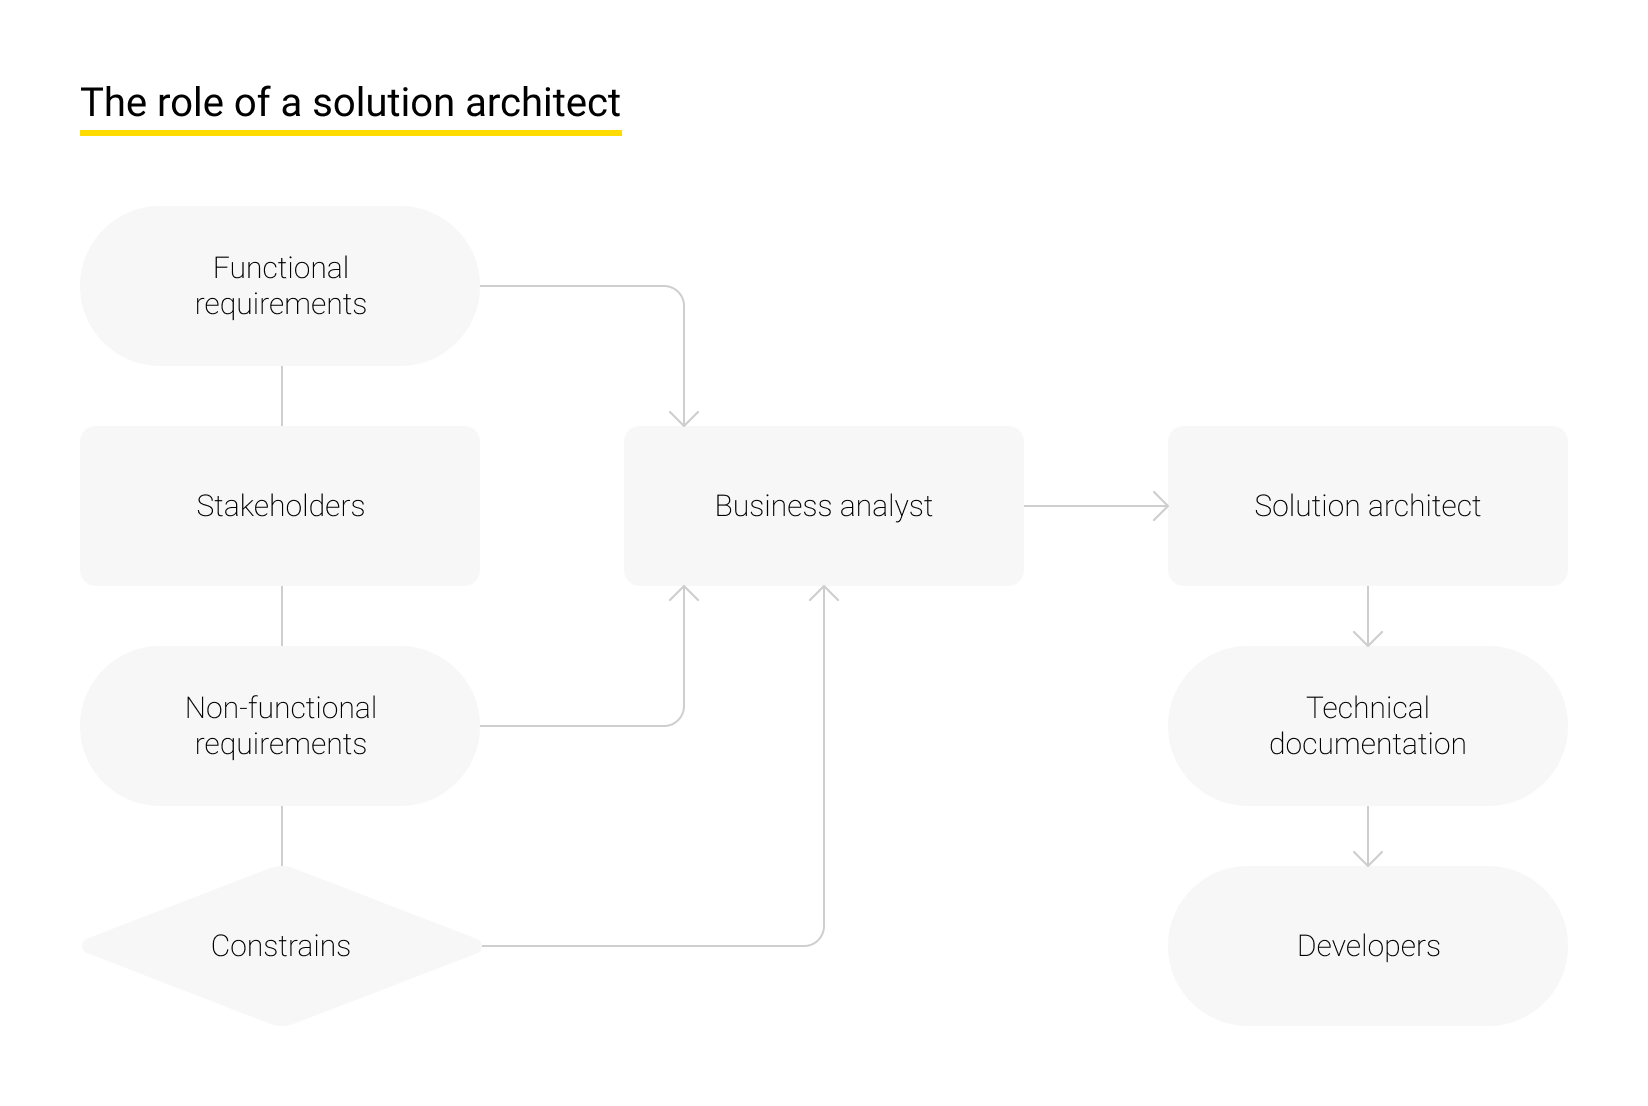 The role of a solution architect